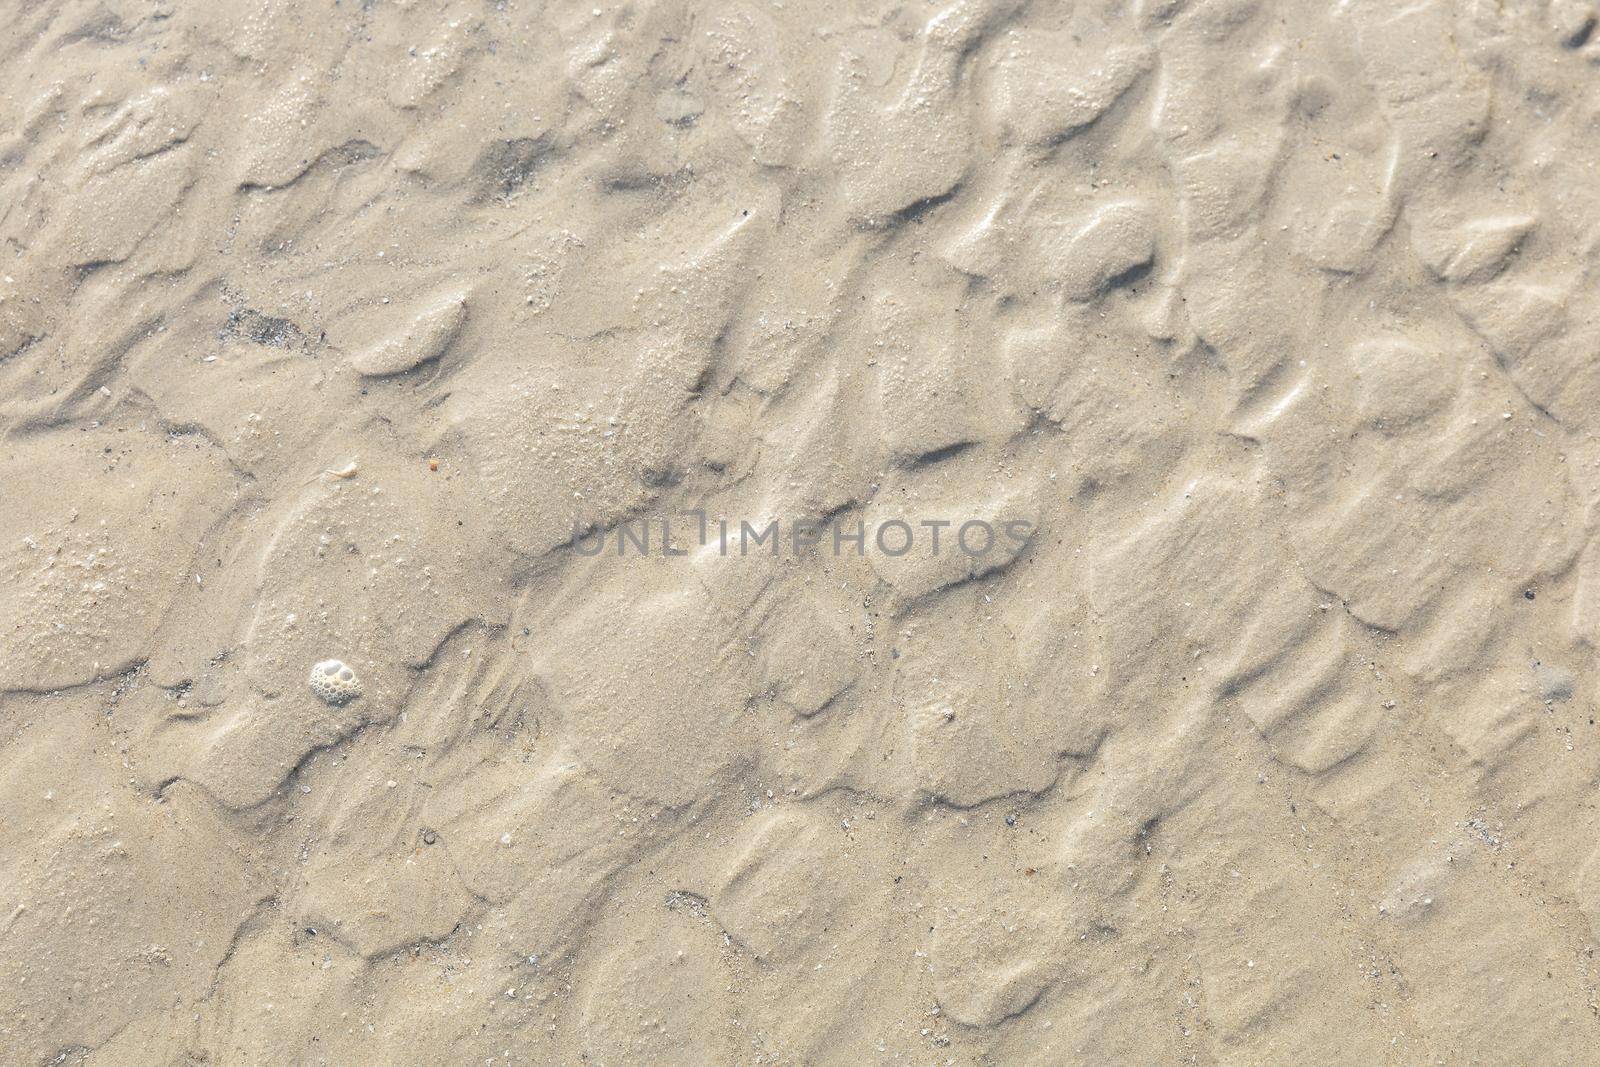 Close up sand on beach, use for holiday or vacation advertising